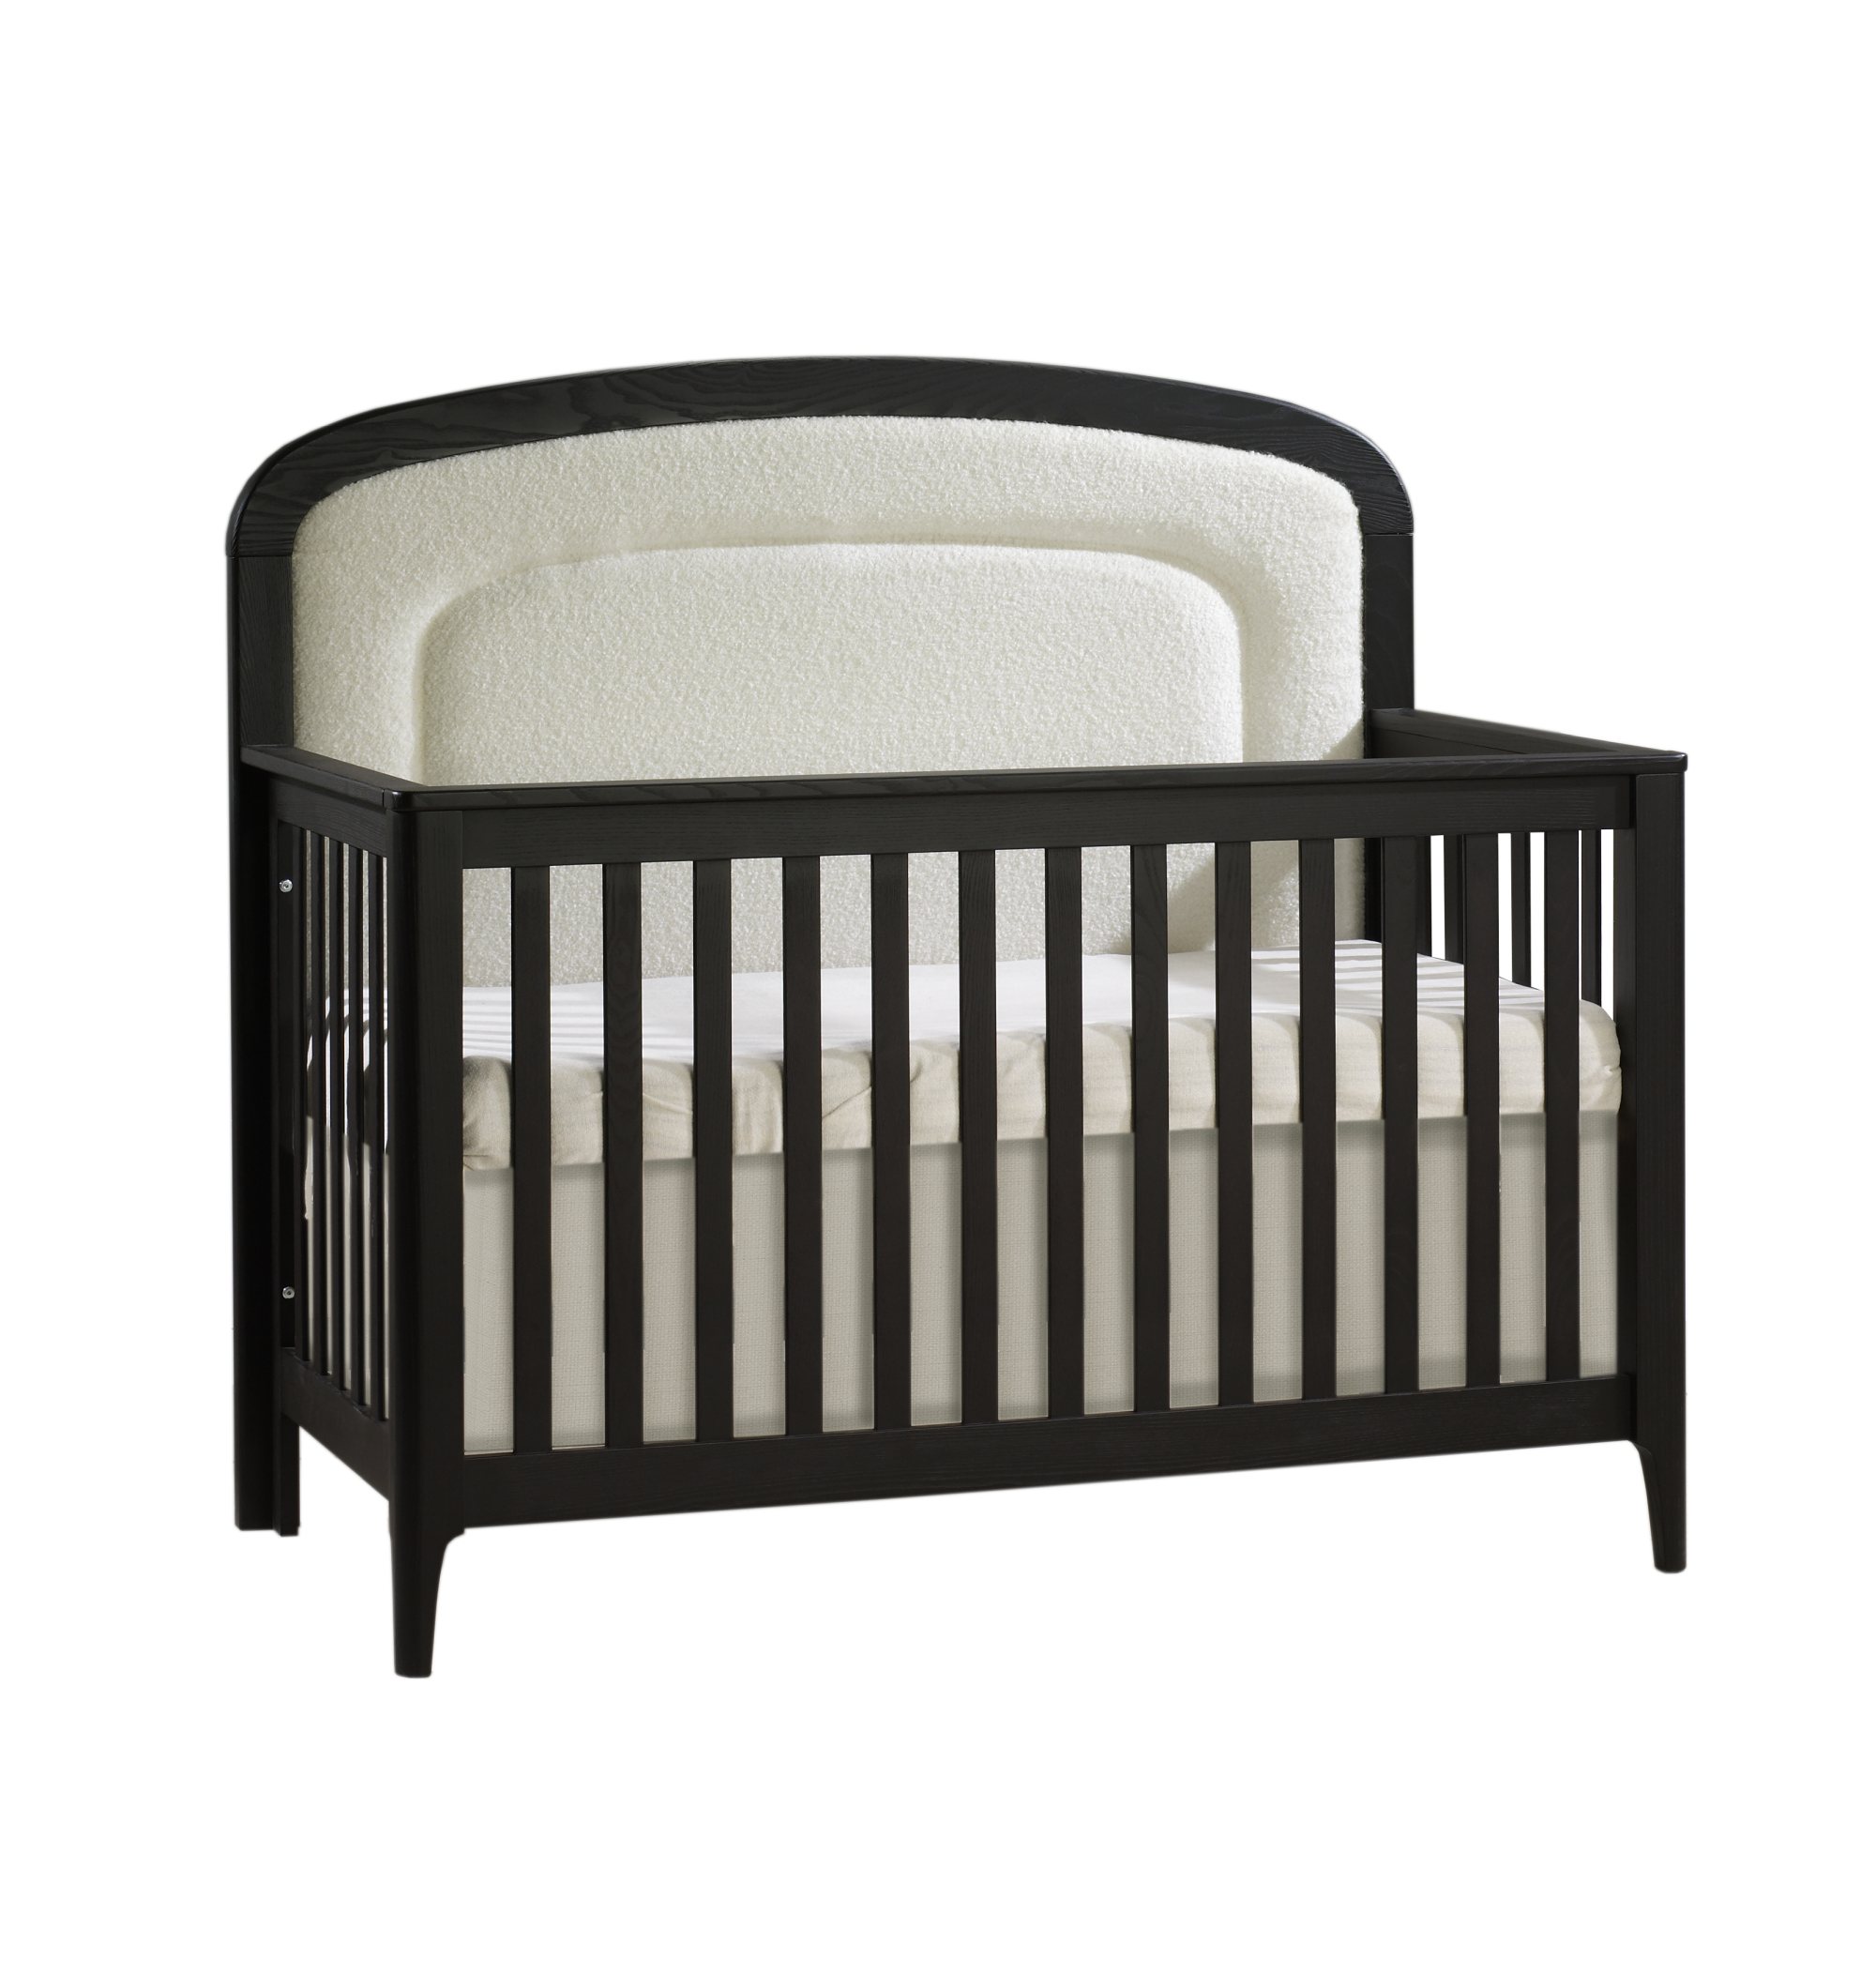 Palo “5-in-1” Convertible Crib with Bouclé Beige Upholstered headboard panel in Dusk